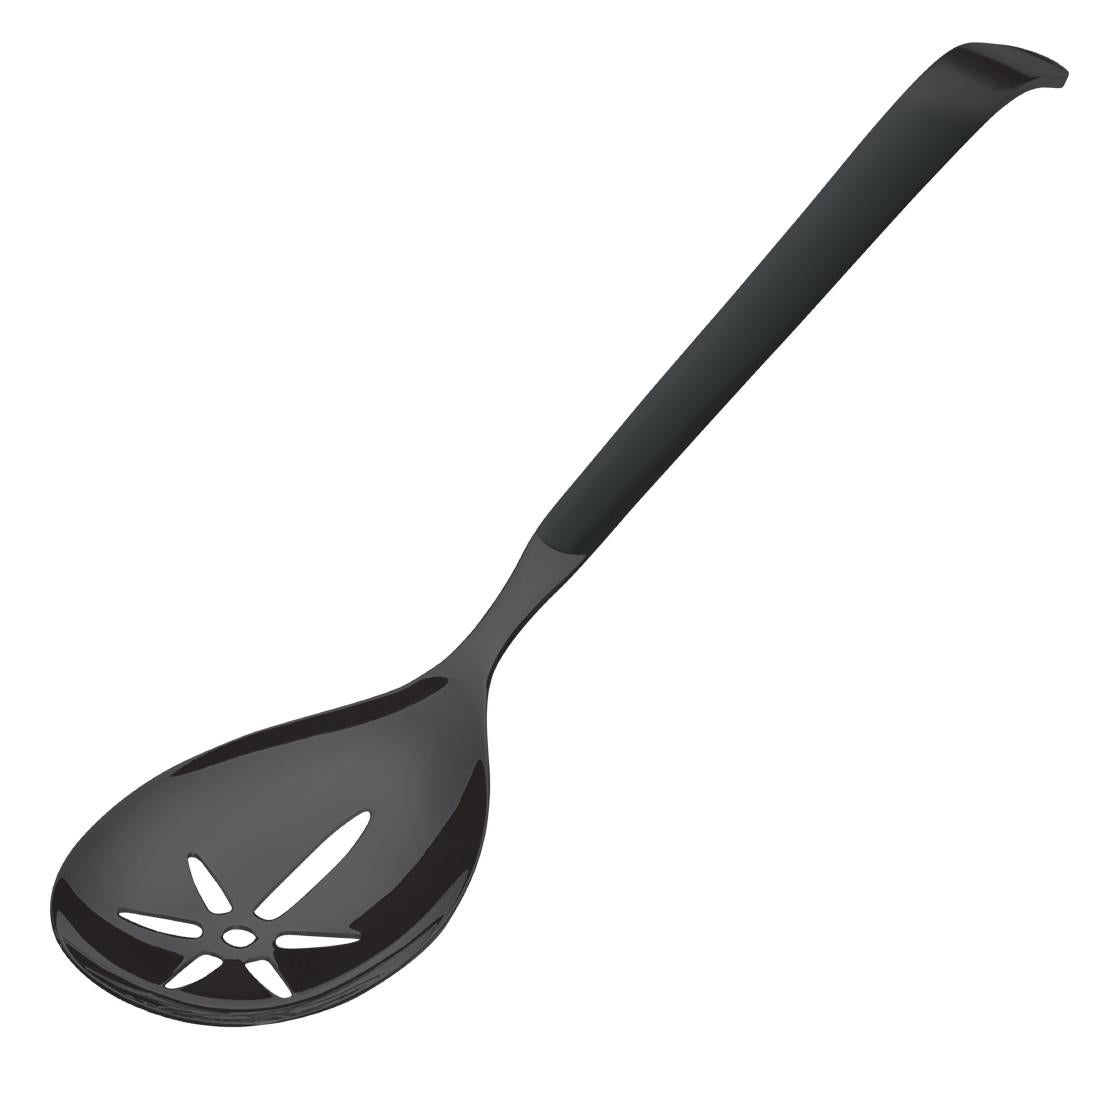 DX666 Amefa Buffet Slotted Serving Spoon Black (Pack of 6)